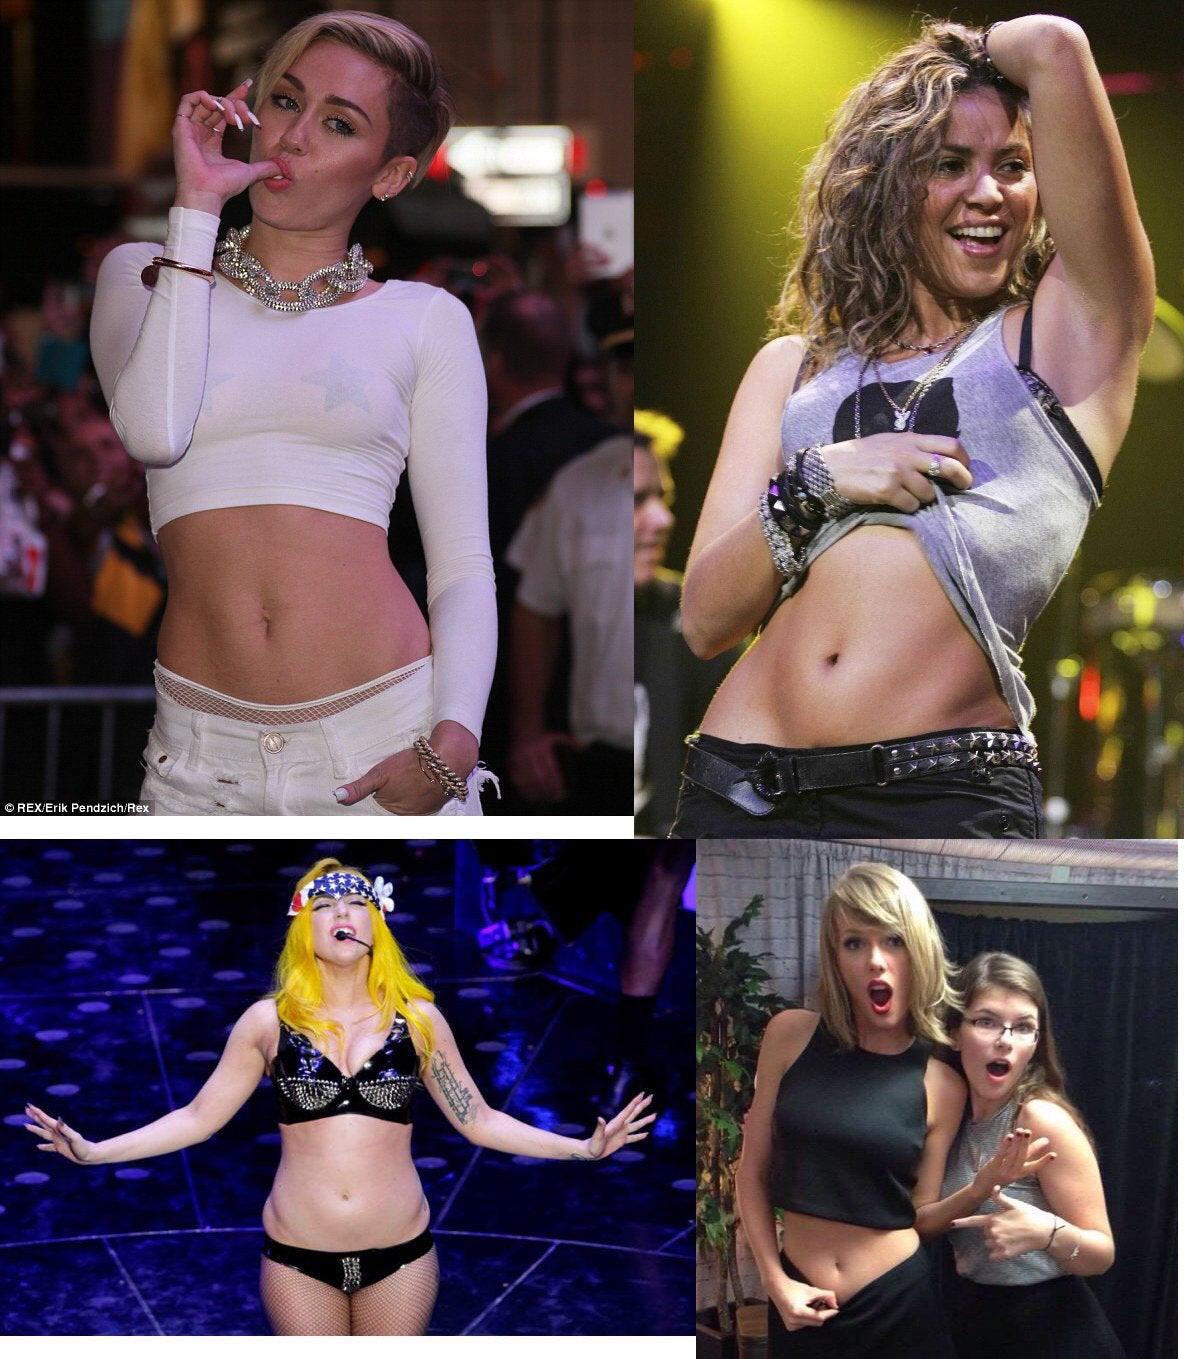 Anyone else have a thing for celeb bellies? Miley, Shakira, Lady Gaga, and Taylor Swift are some of my favs. What other bellies do you love?